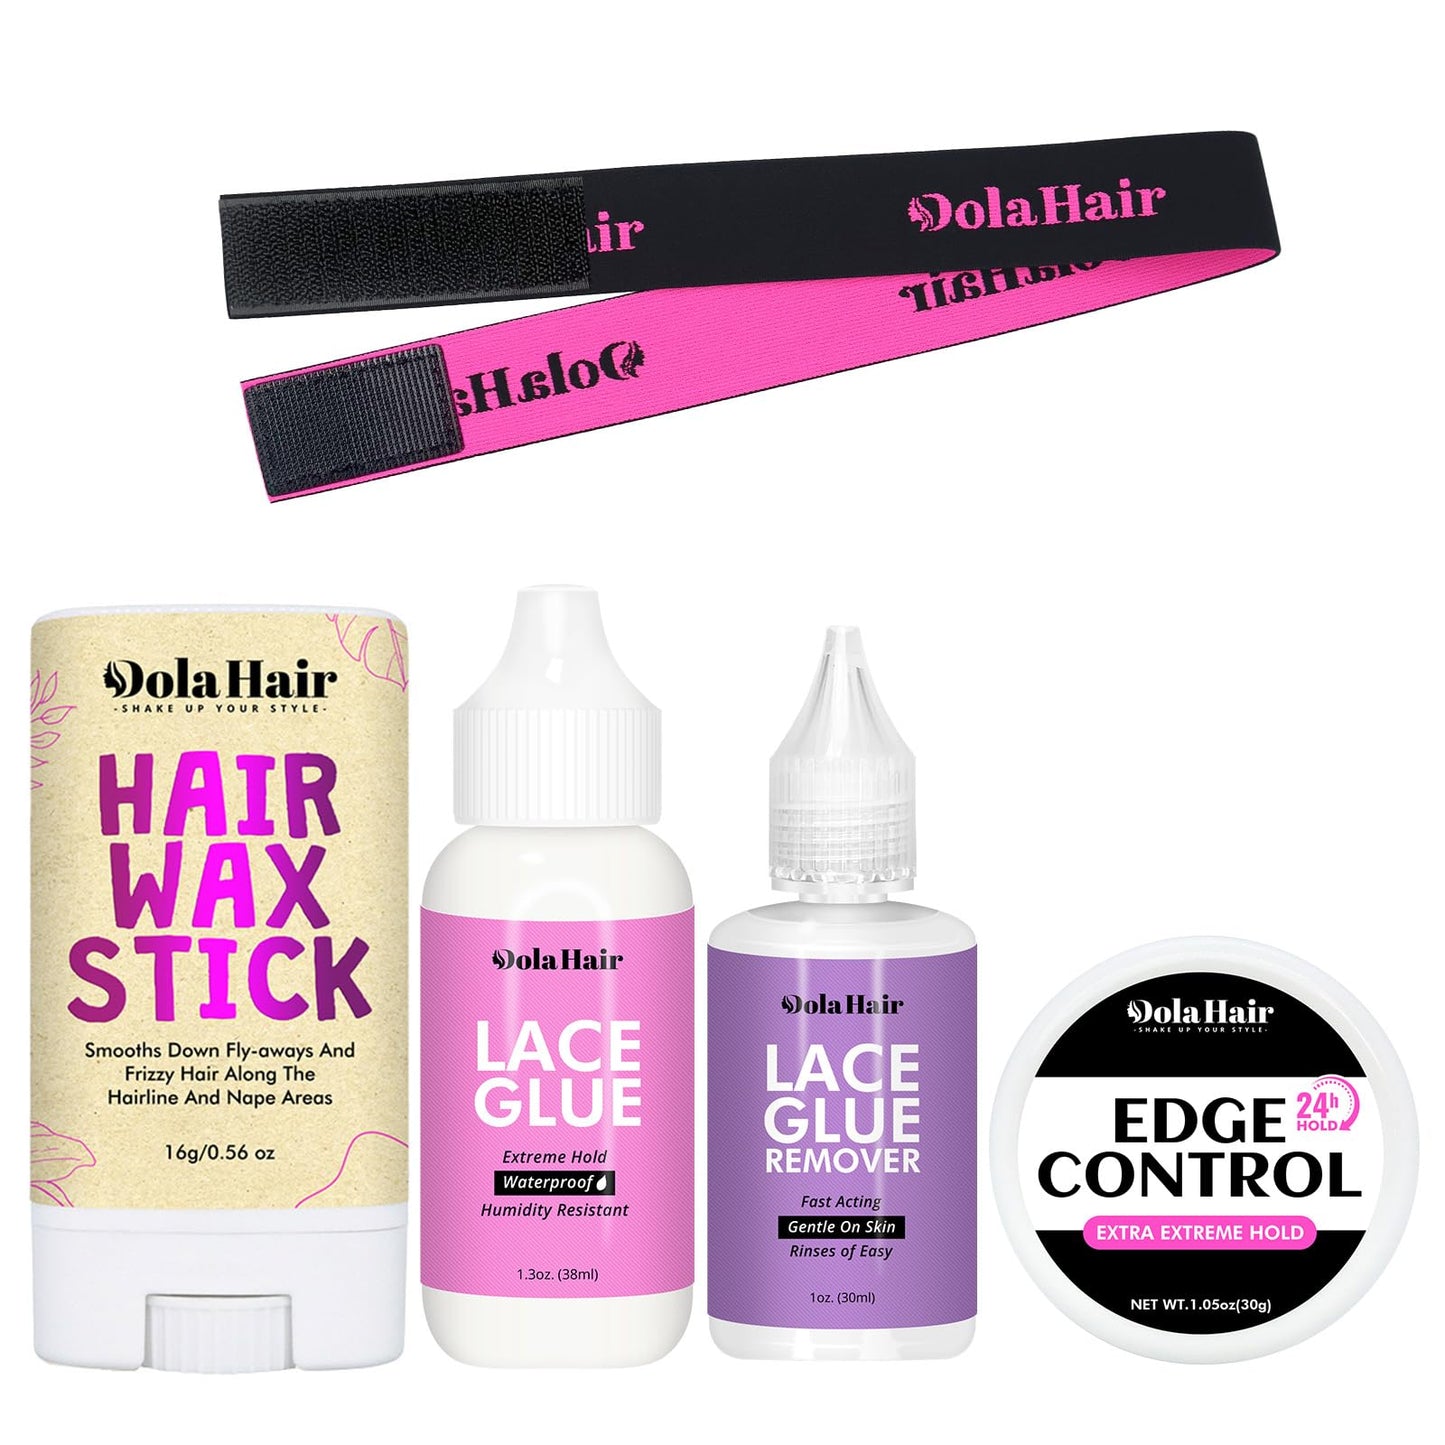 Dolahair Lace Wig Glue Kit Lace Front Glue Kit for Wigs Waterproof Wig Glue Strong Hold Wig Glue Kit Wig Install Kit Wig Installation Kit Lace Front Kit Hair Replacement Adhesive Invisible Bonding